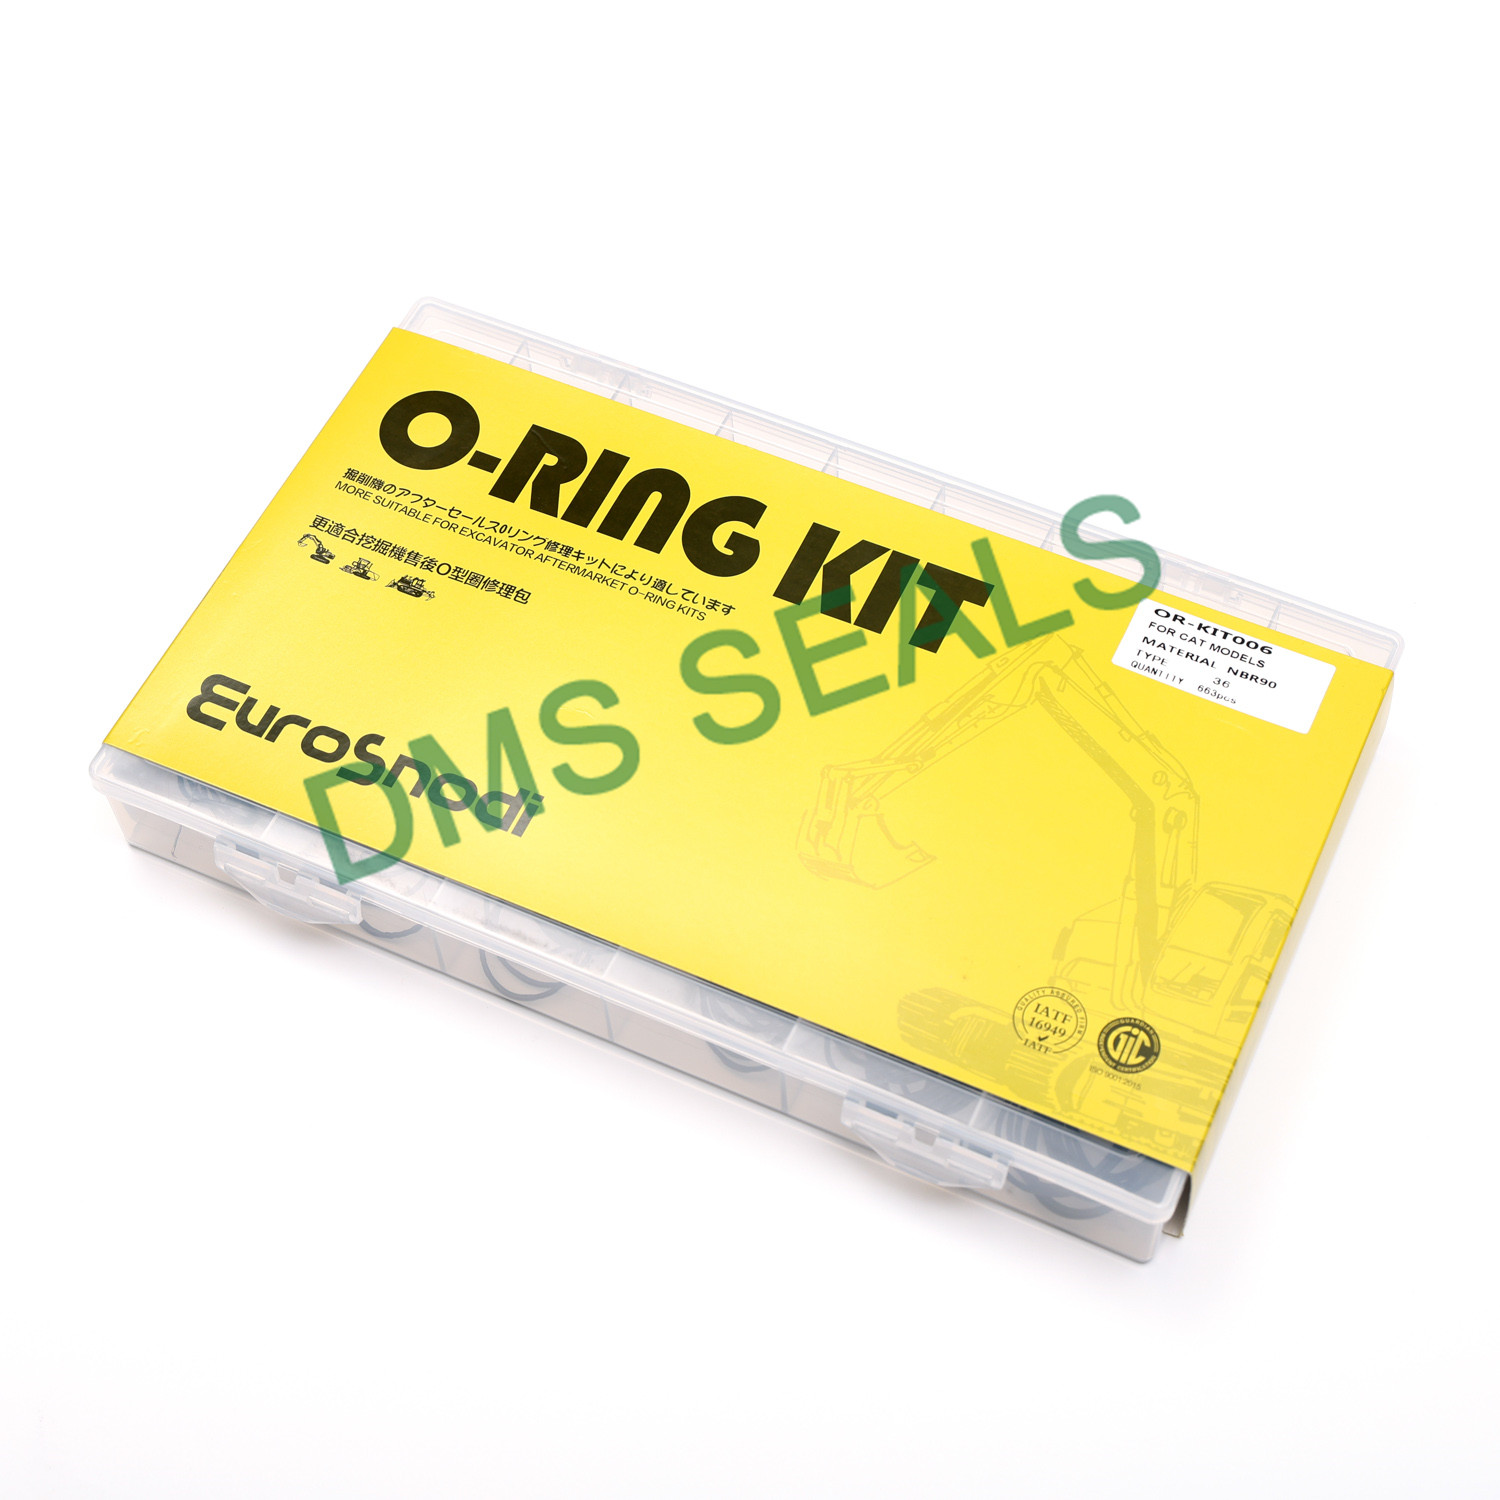 DMS Seals rubber o ring price vendor For sealing products-2